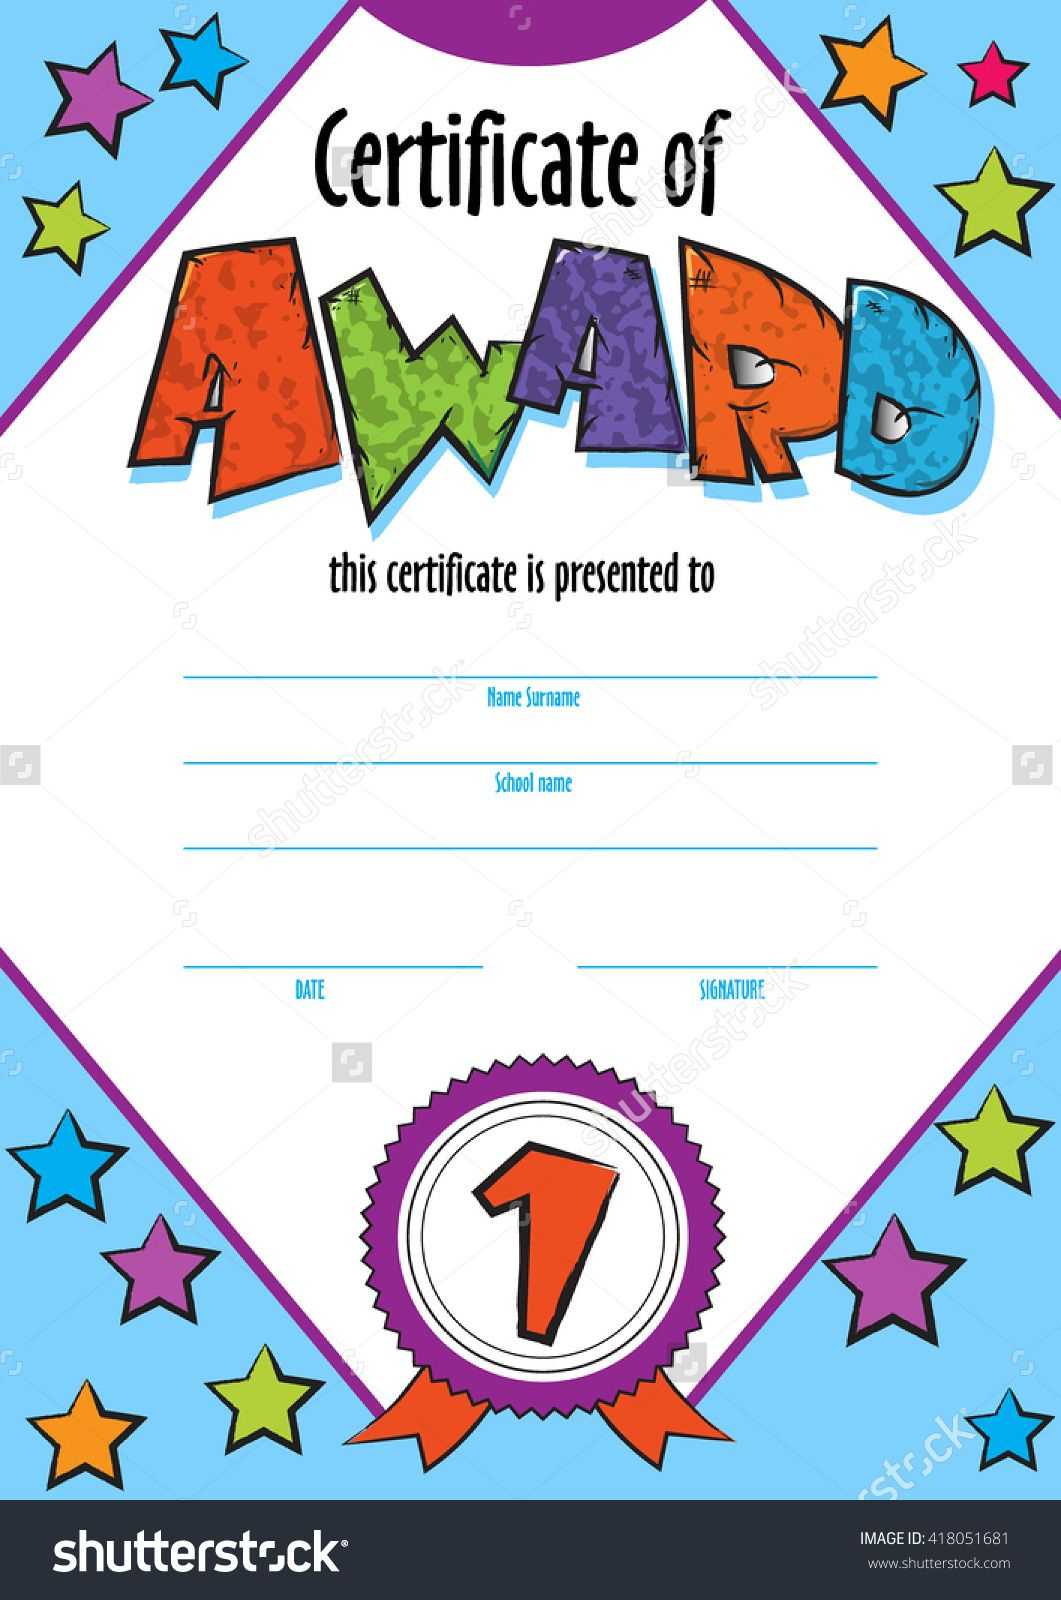 Template Child Certificate To Be Awarded. Kindergarten For Classroom Certificates Templates